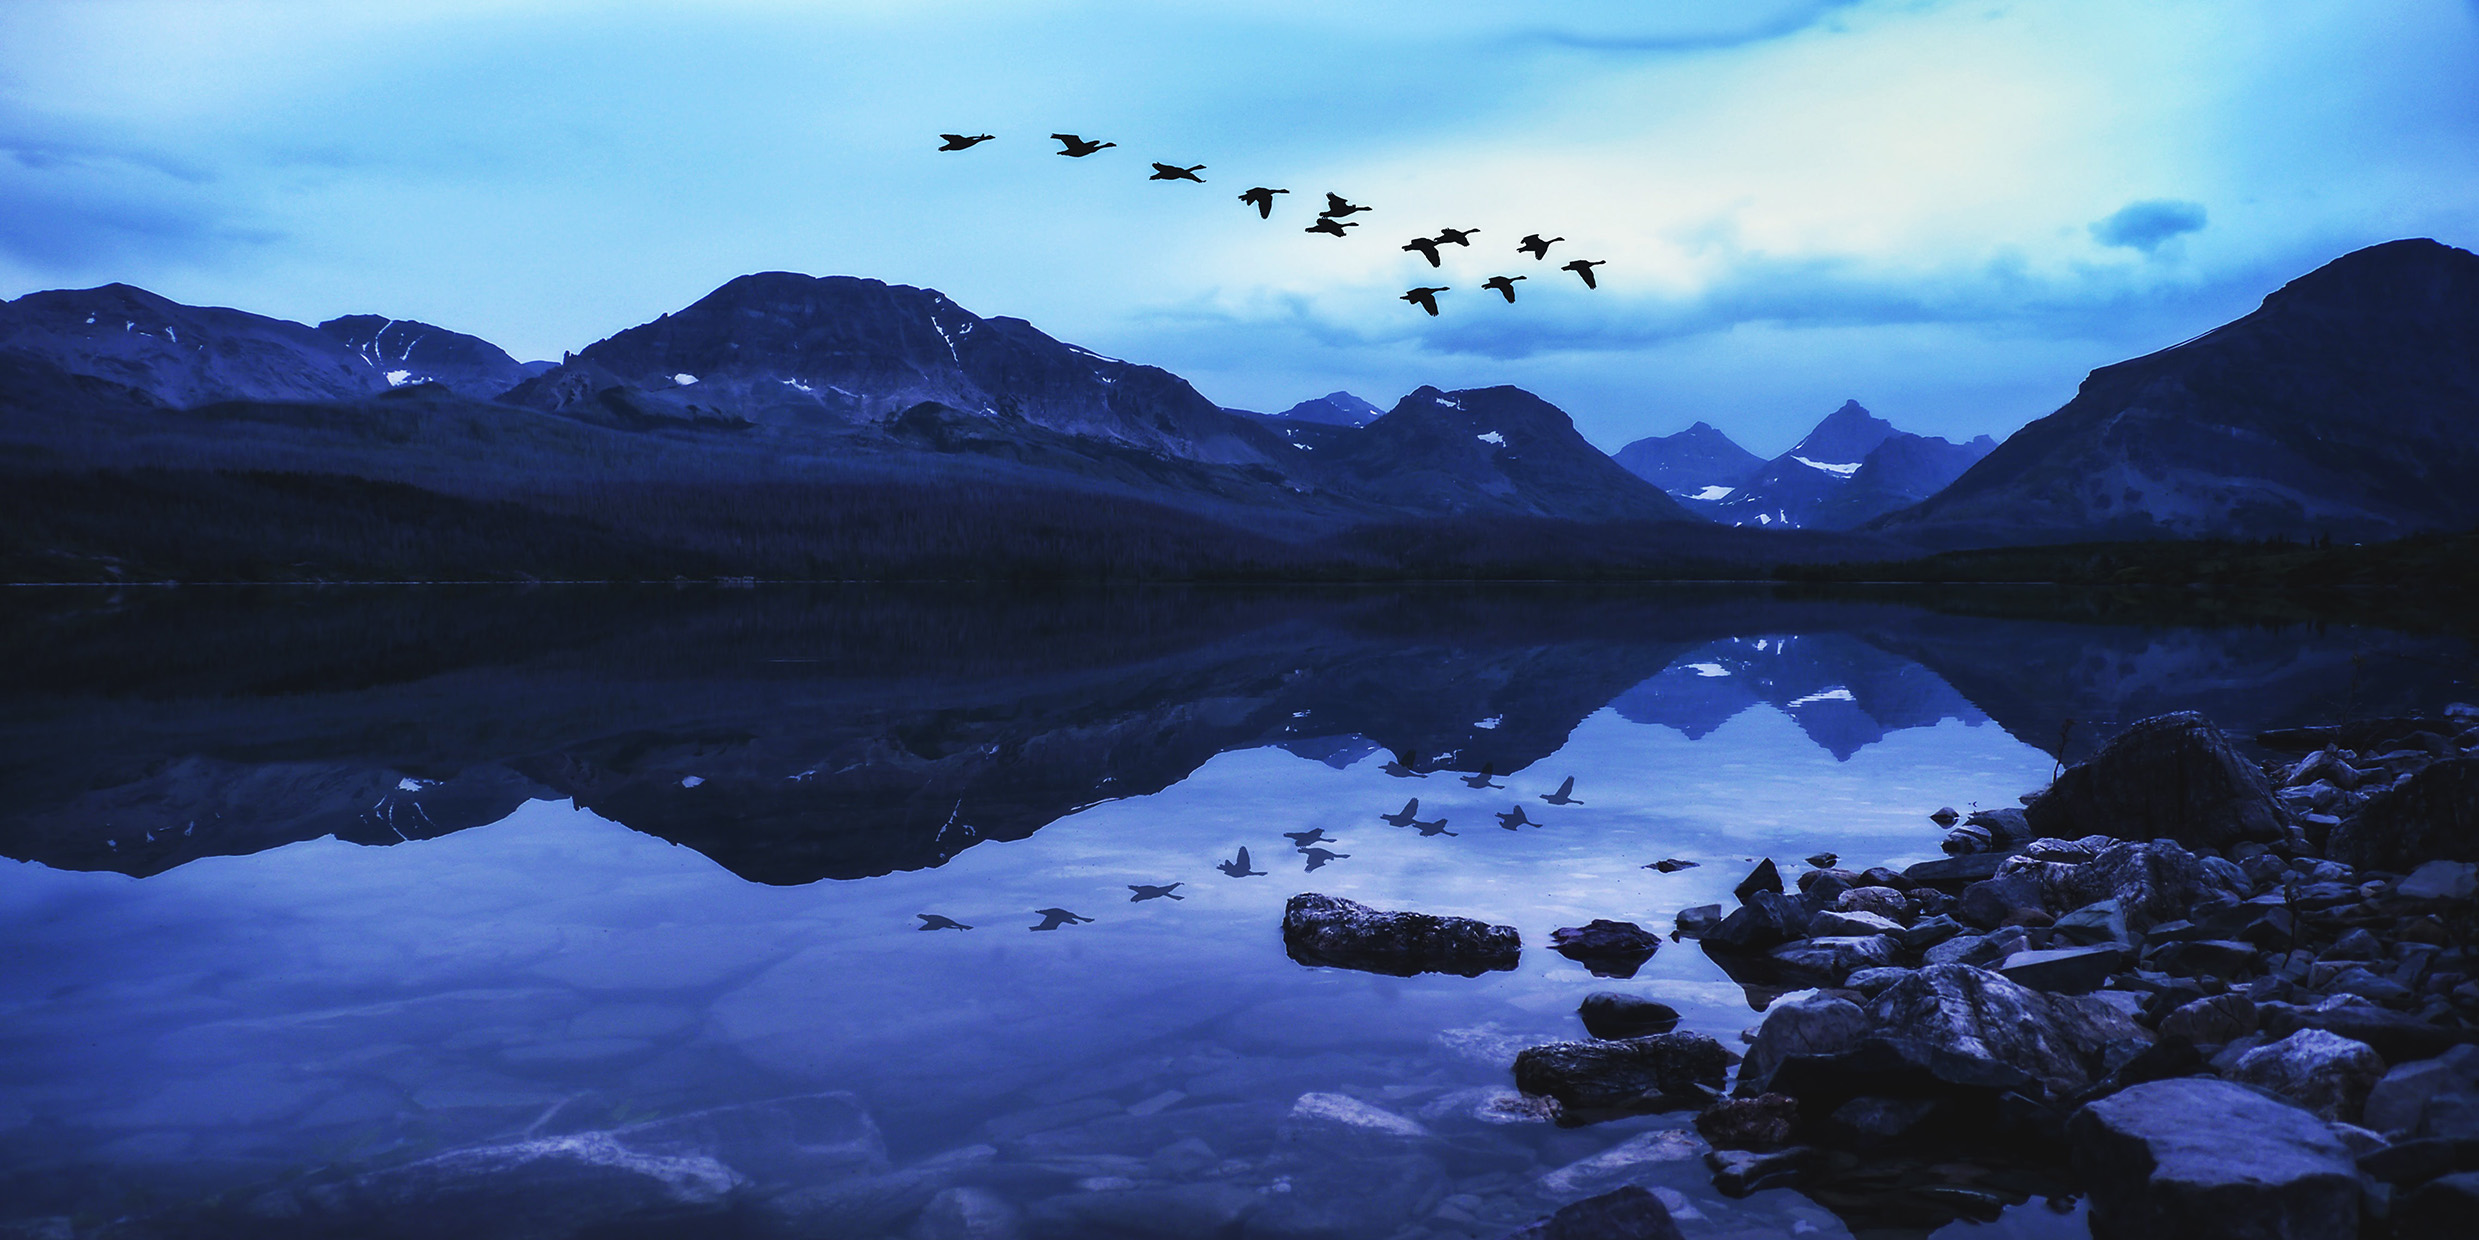 Geese flying in a vee formation over a wilderness landscape